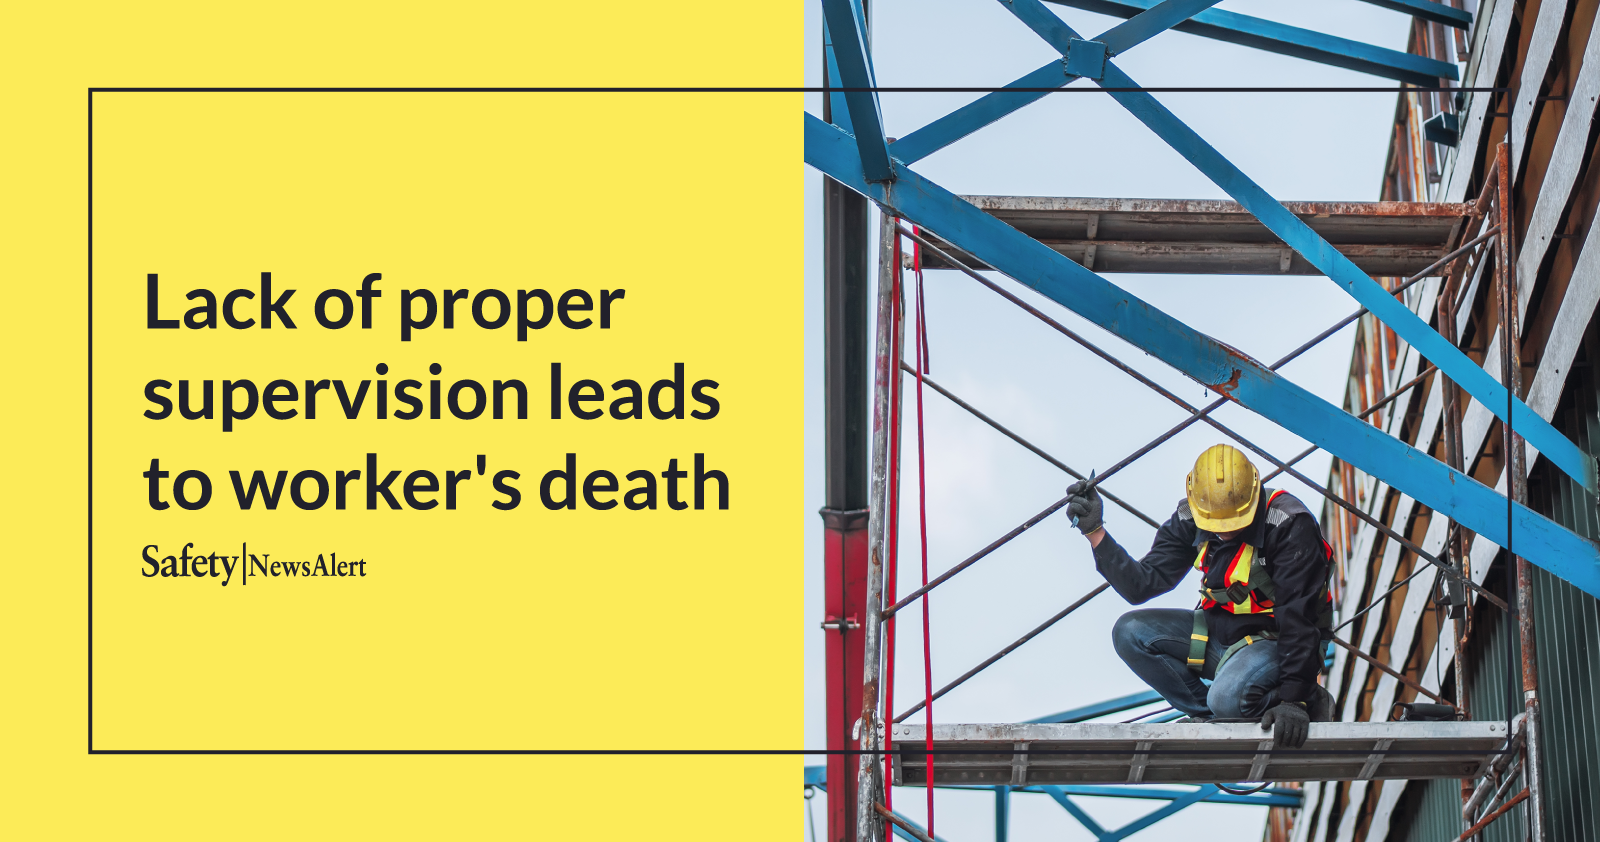 Lack of proper supervision leads to worker's death